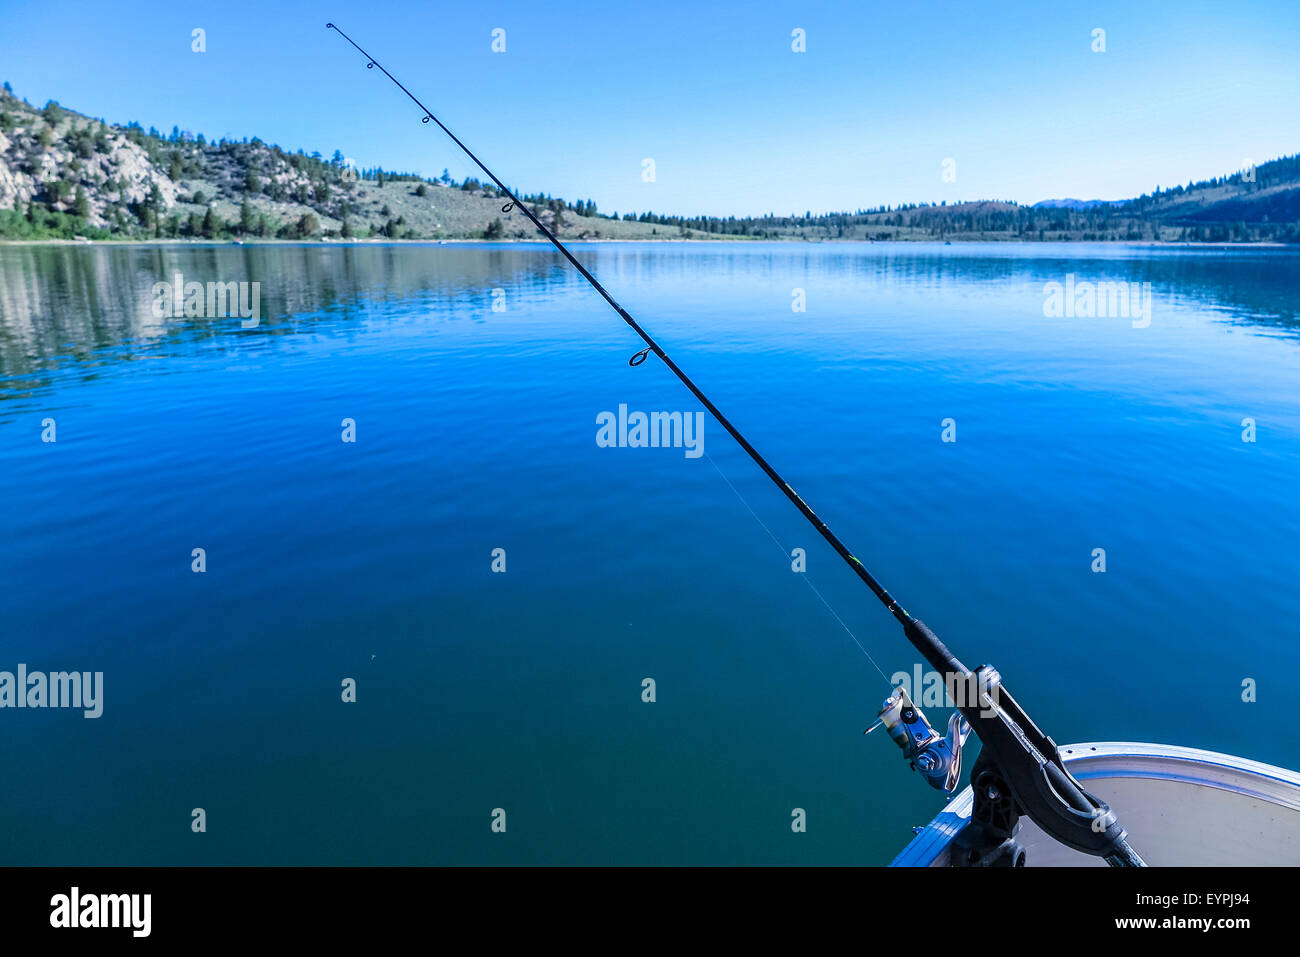 A fishing pole in a holder on Pontoon boat on June Lake in California Stock Photo